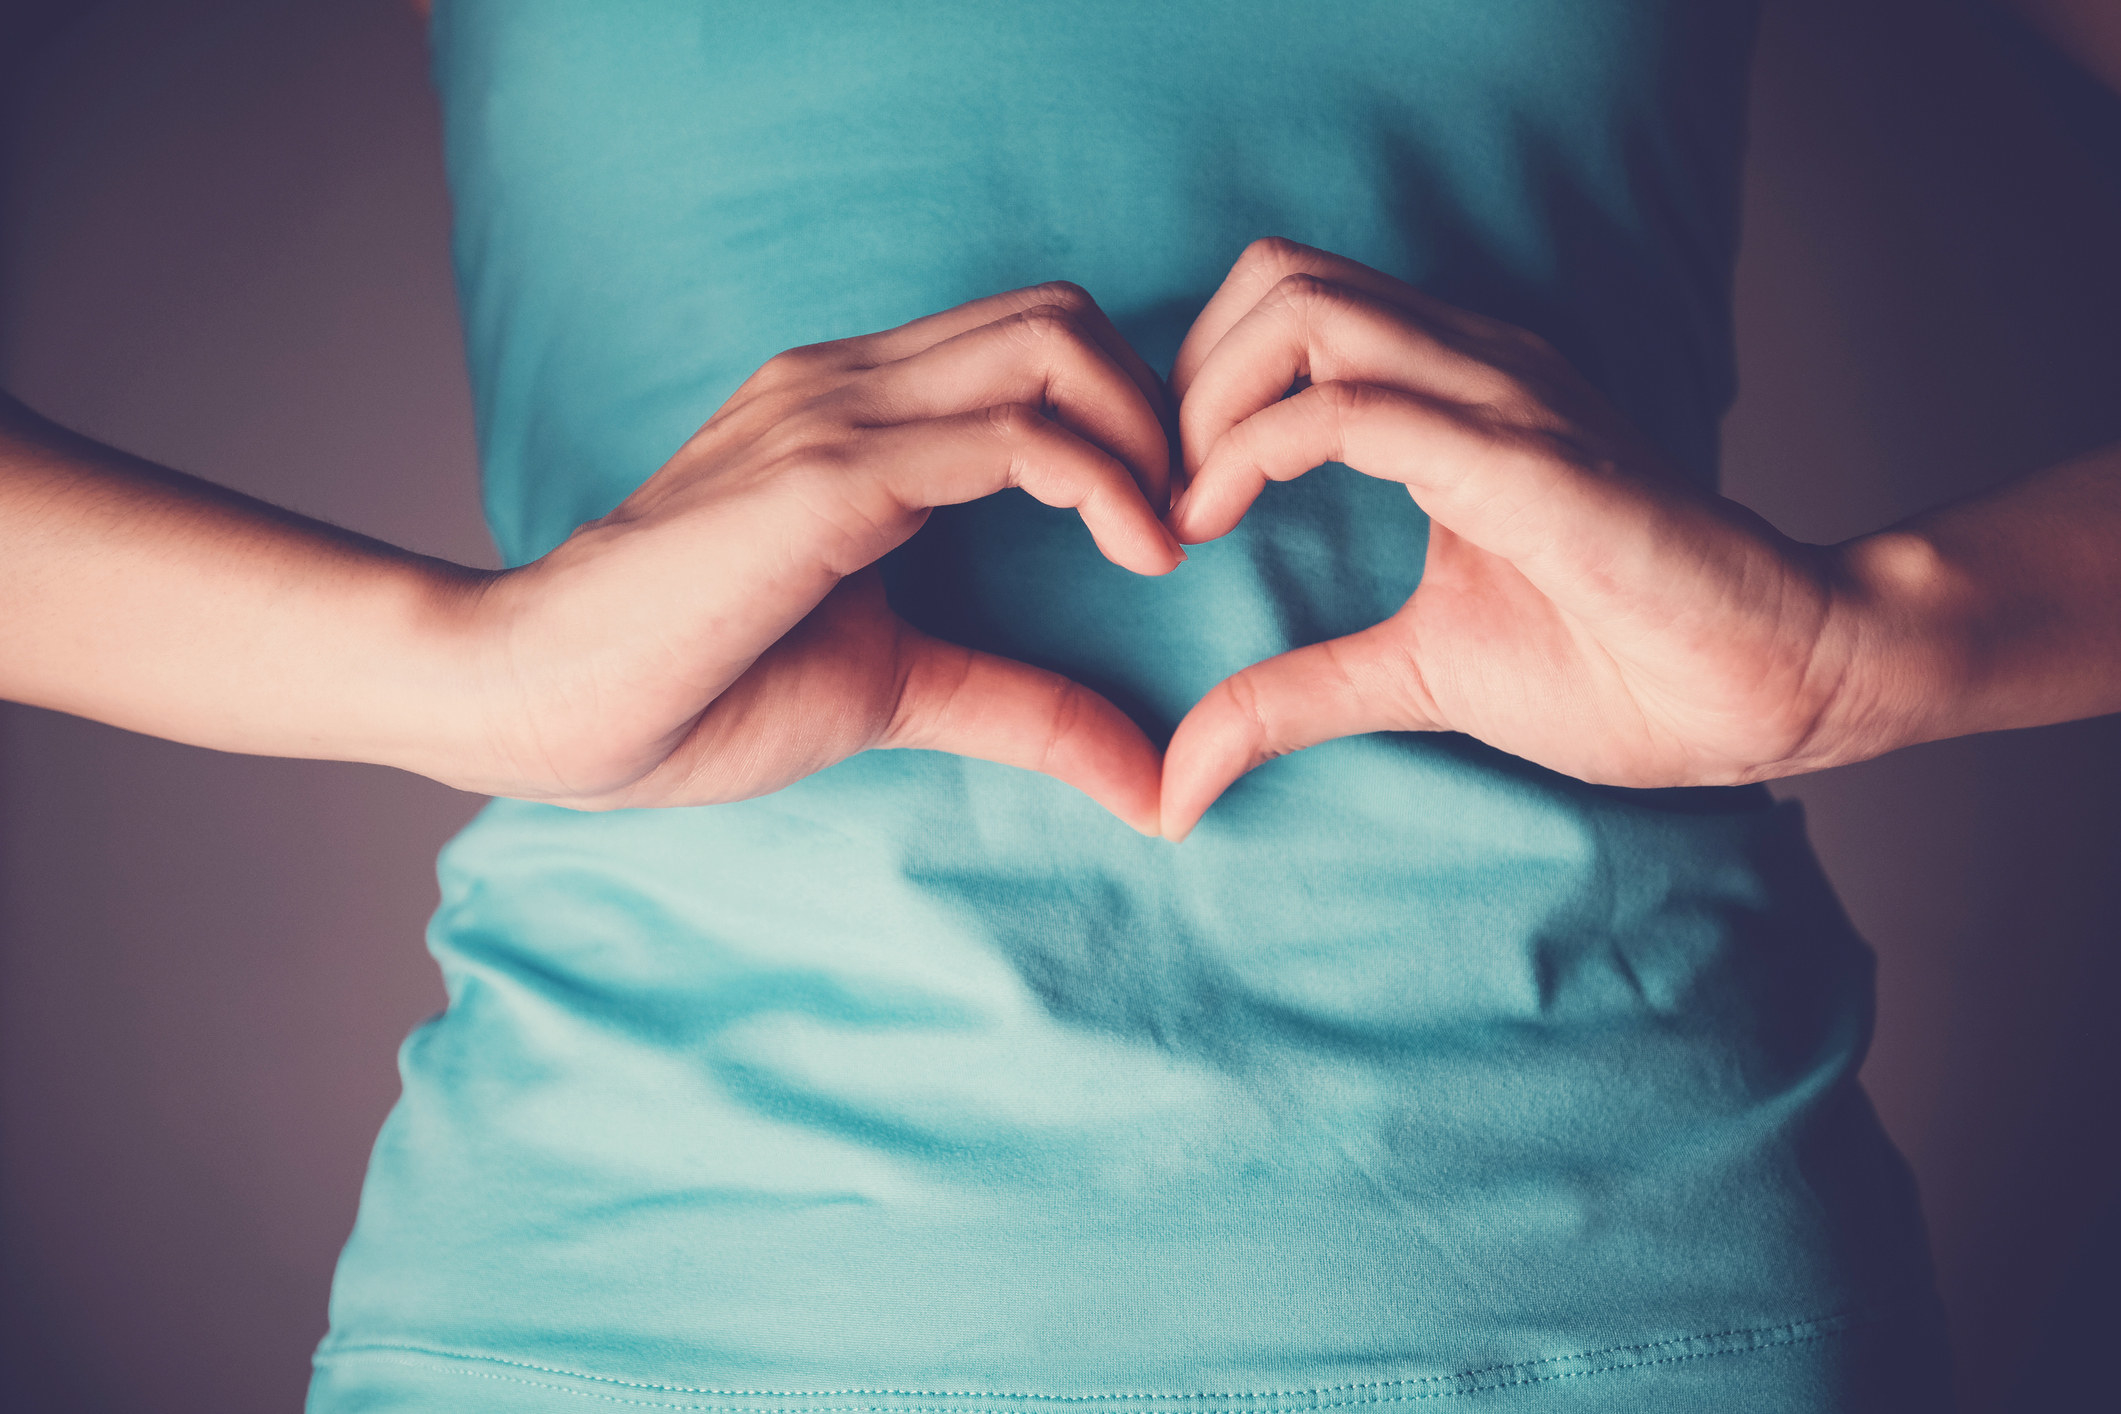 Woman making a heart with her hands over her stomach.